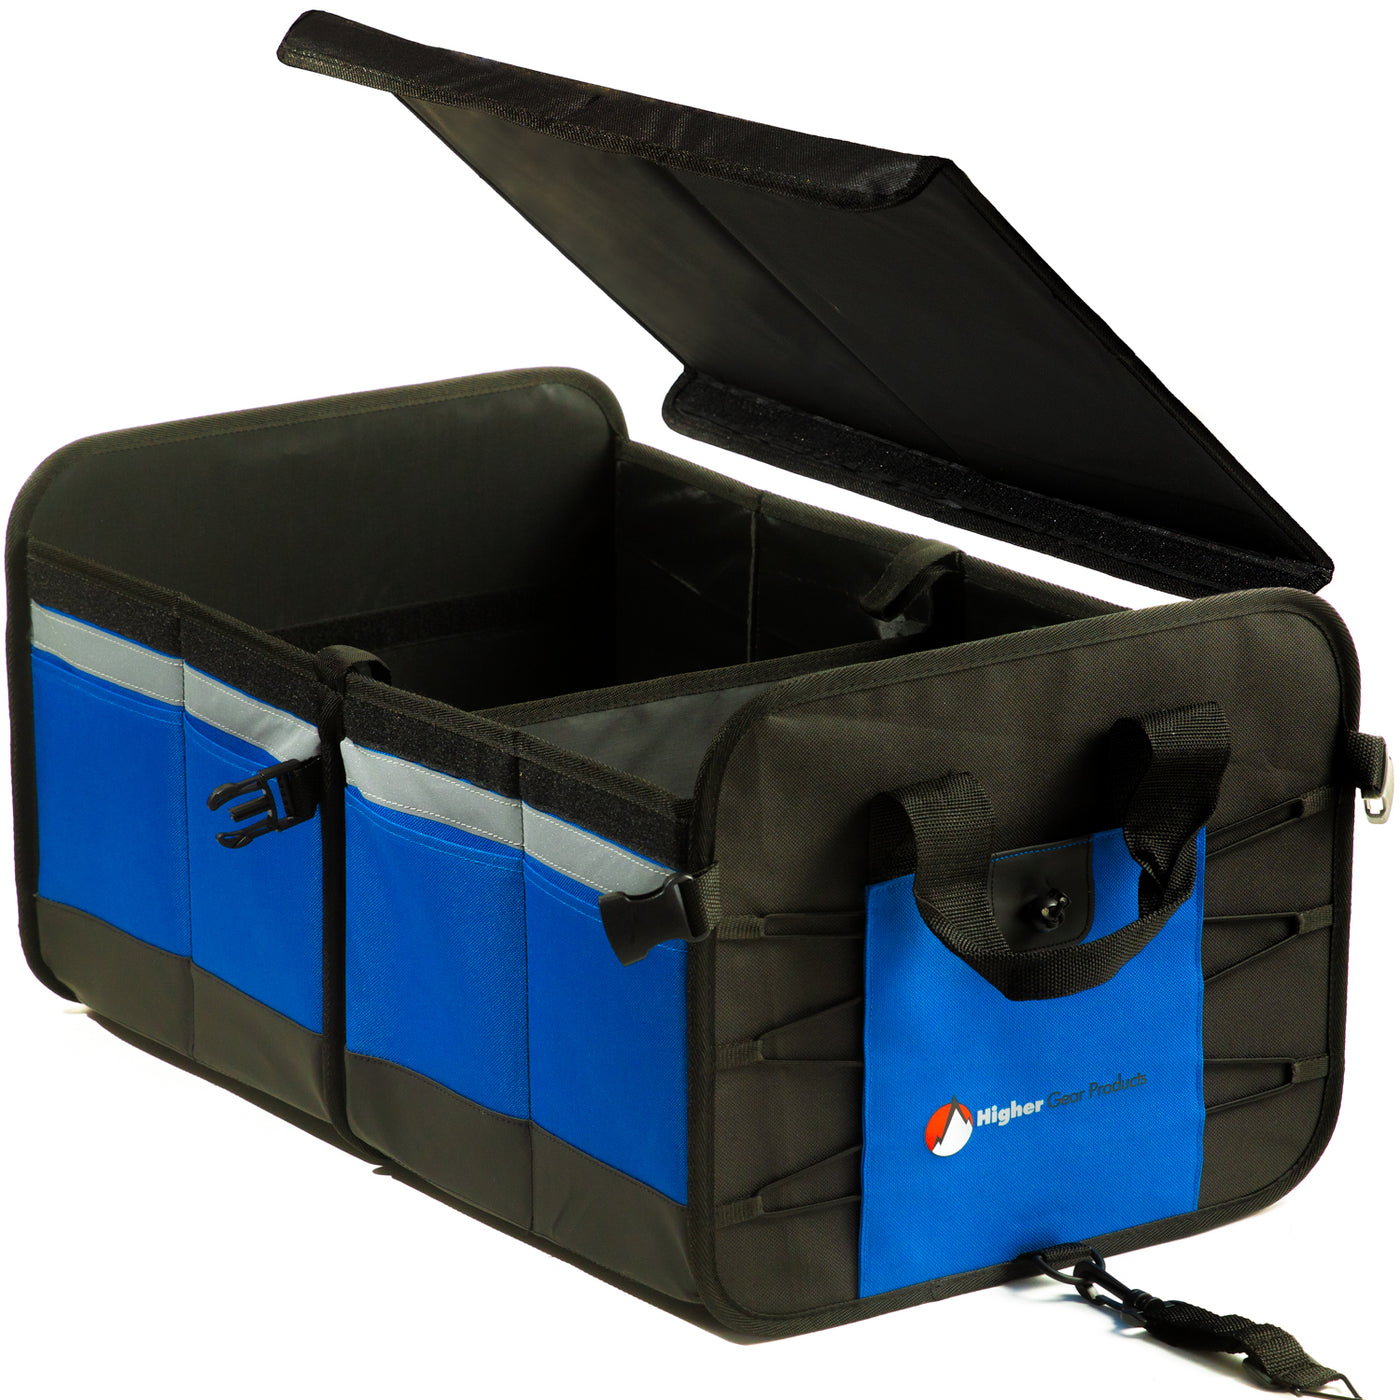 Large Size Car Trunk Organizer - Higher Gear Products